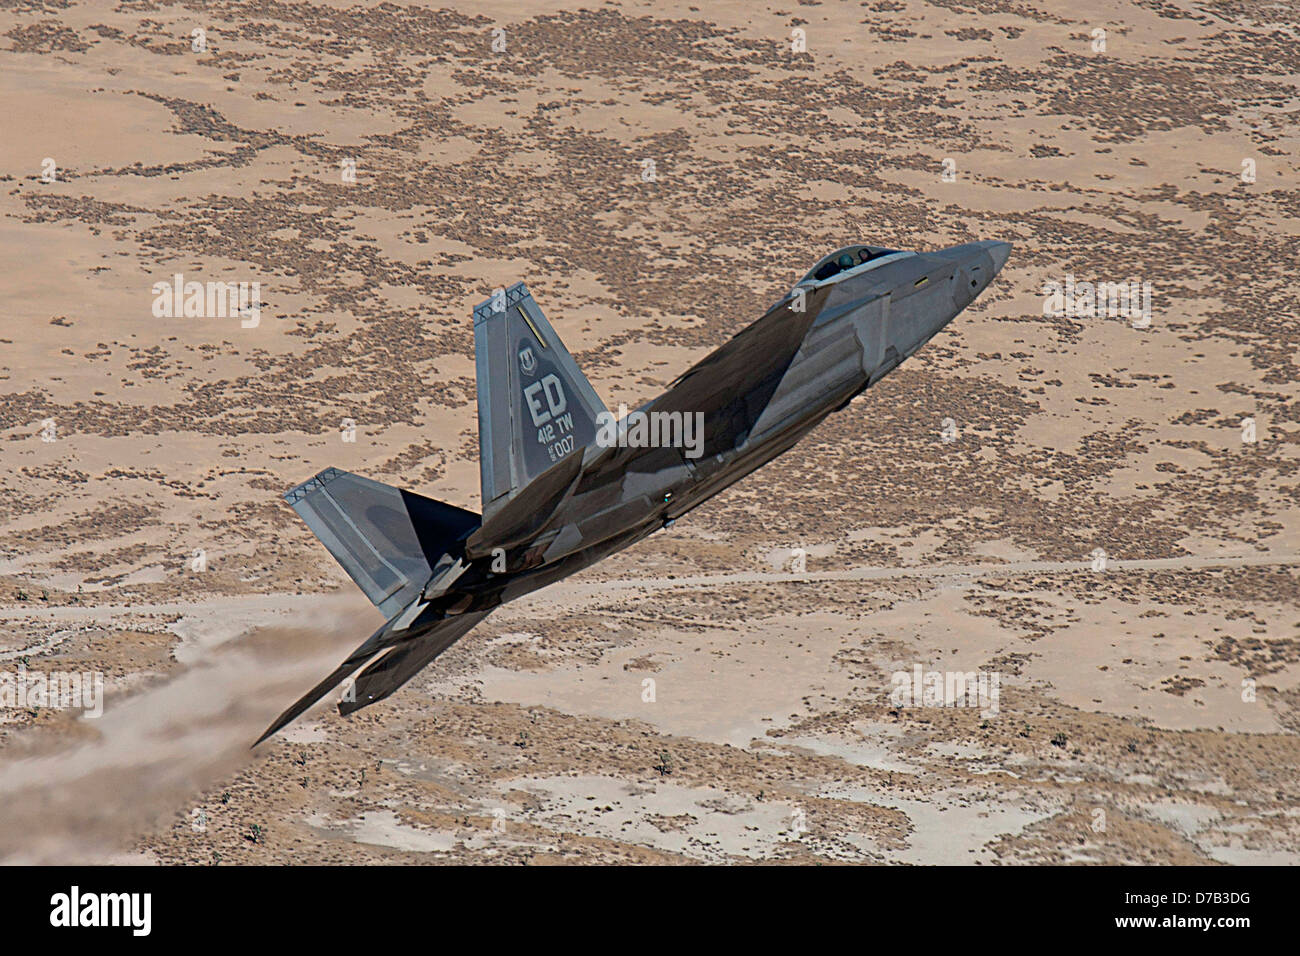 A US Air Force F-22 flies over the desert during a training mission September 27, 2011 at Edwards Air Force Base, CA. Stock Photo